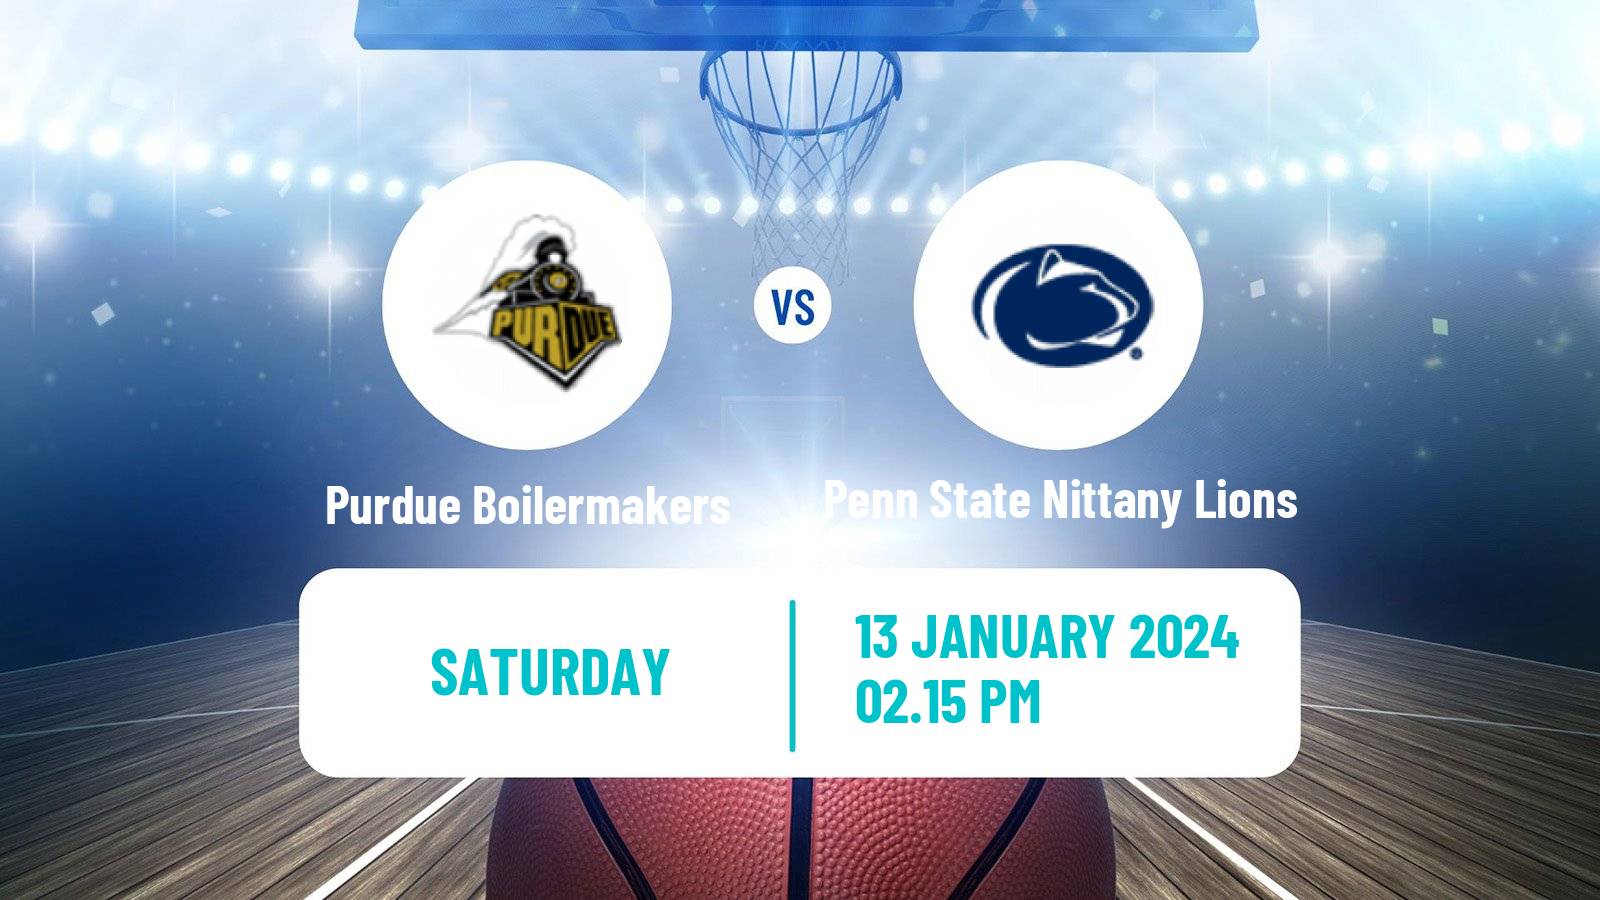 Basketball NCAA College Basketball Purdue Boilermakers - Penn State Nittany Lions